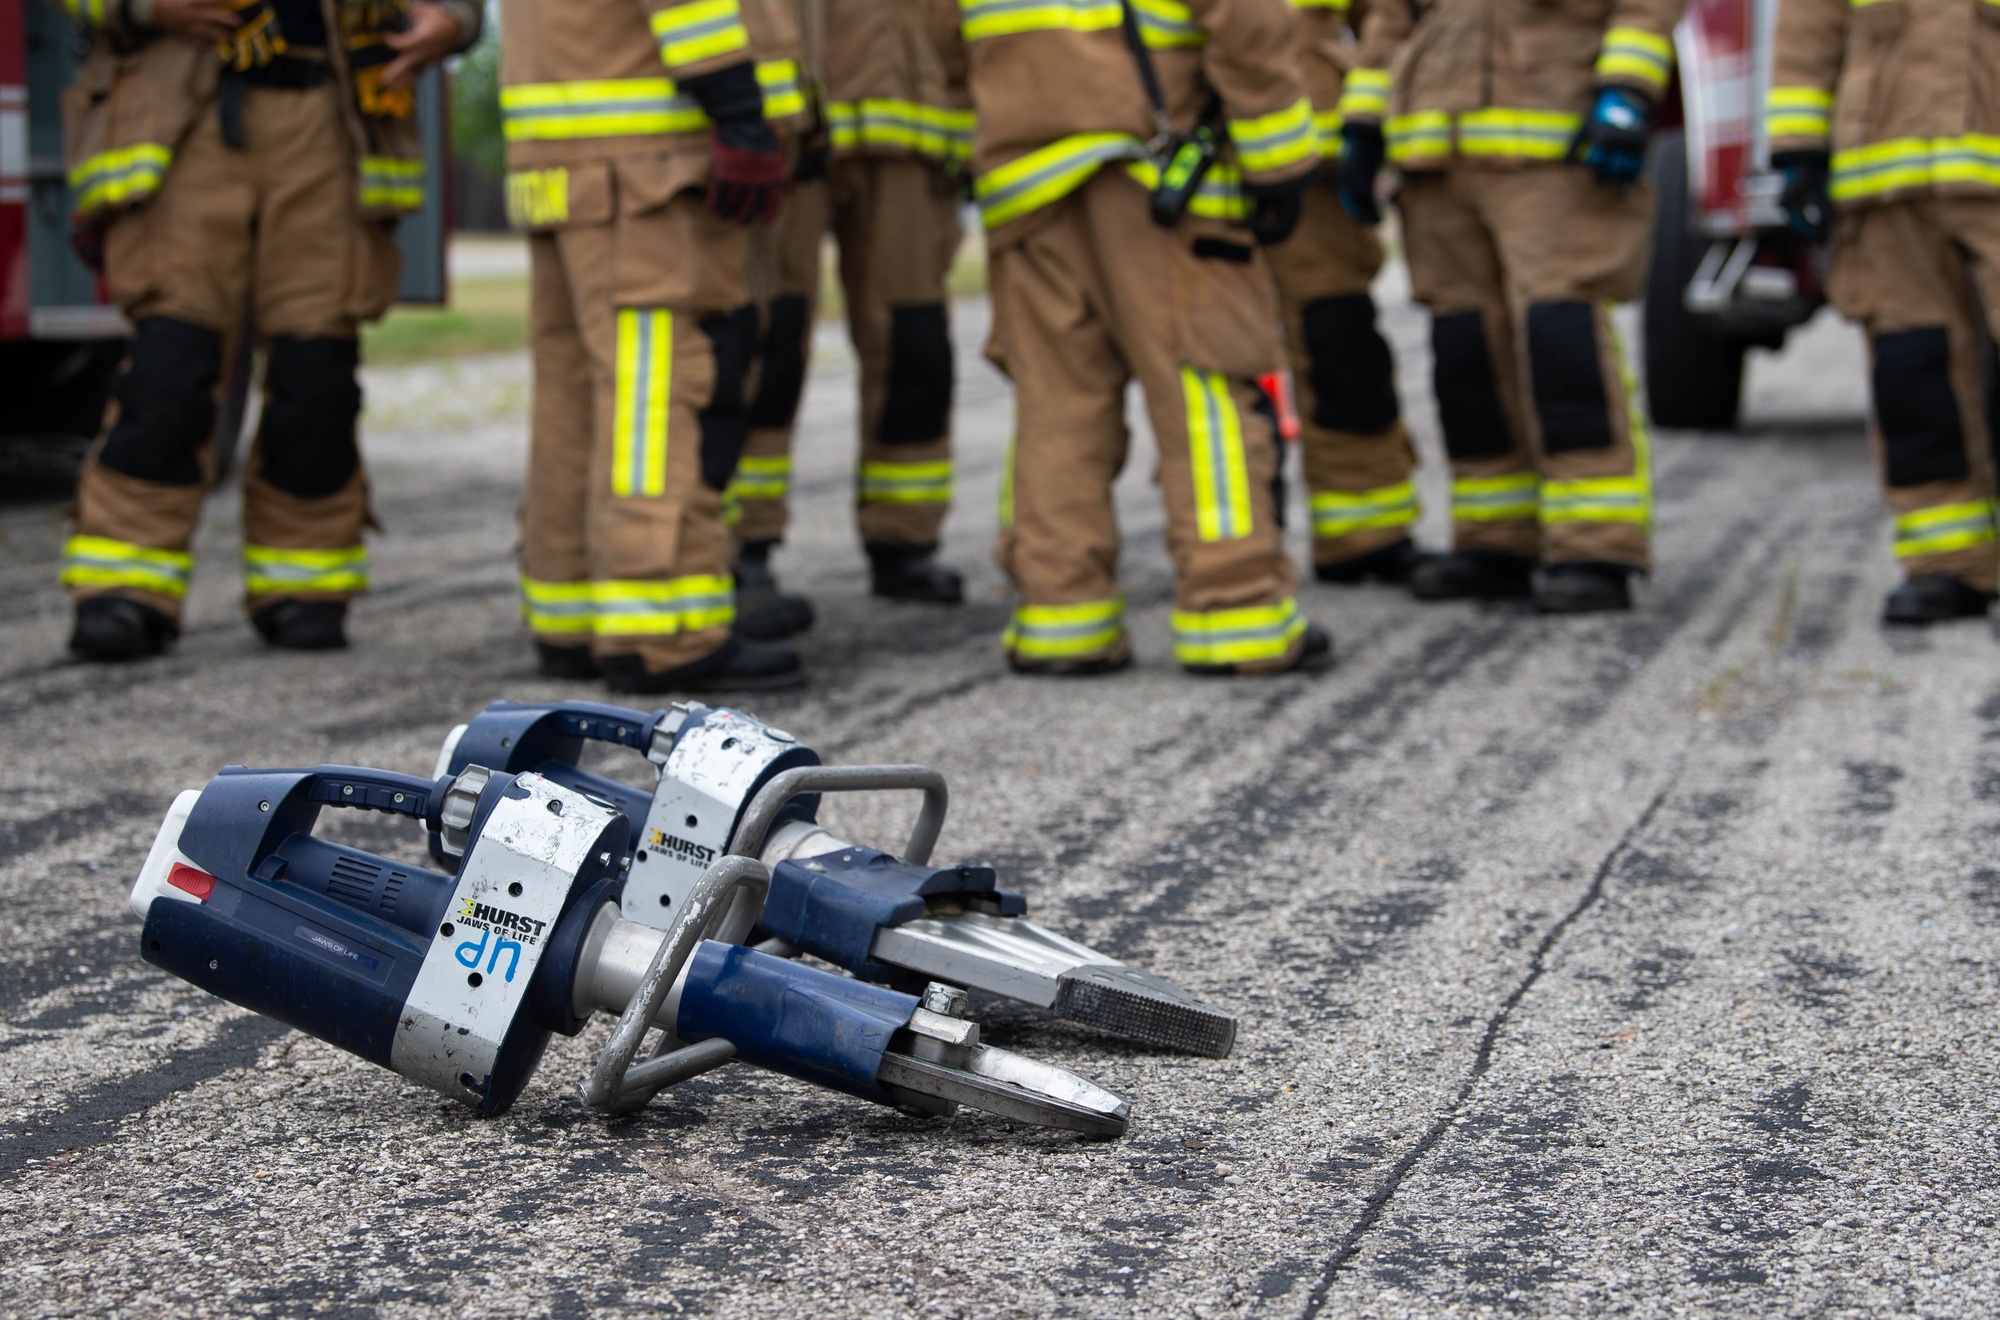 DVIDS - Images - Jaws of Life [Image 2 of 6]